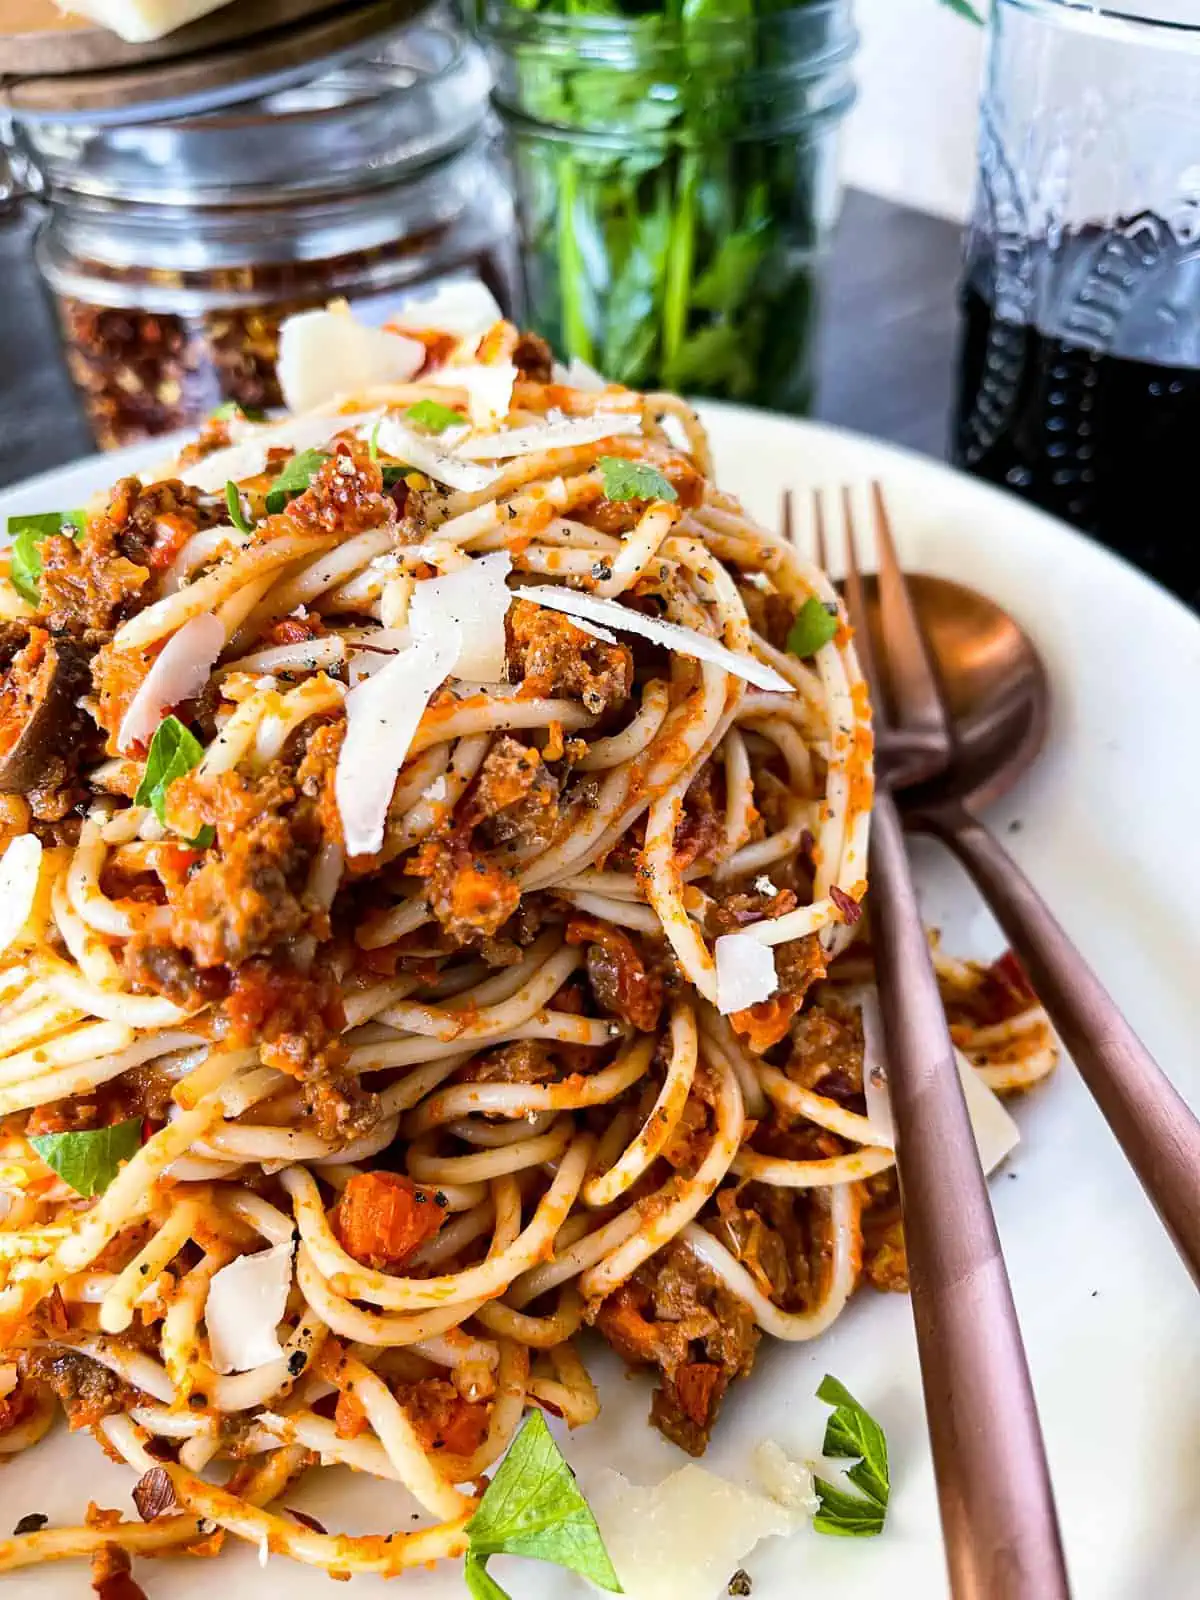 bolognese sauce tossed with spaghetti noodles and topped with parmesan cheese